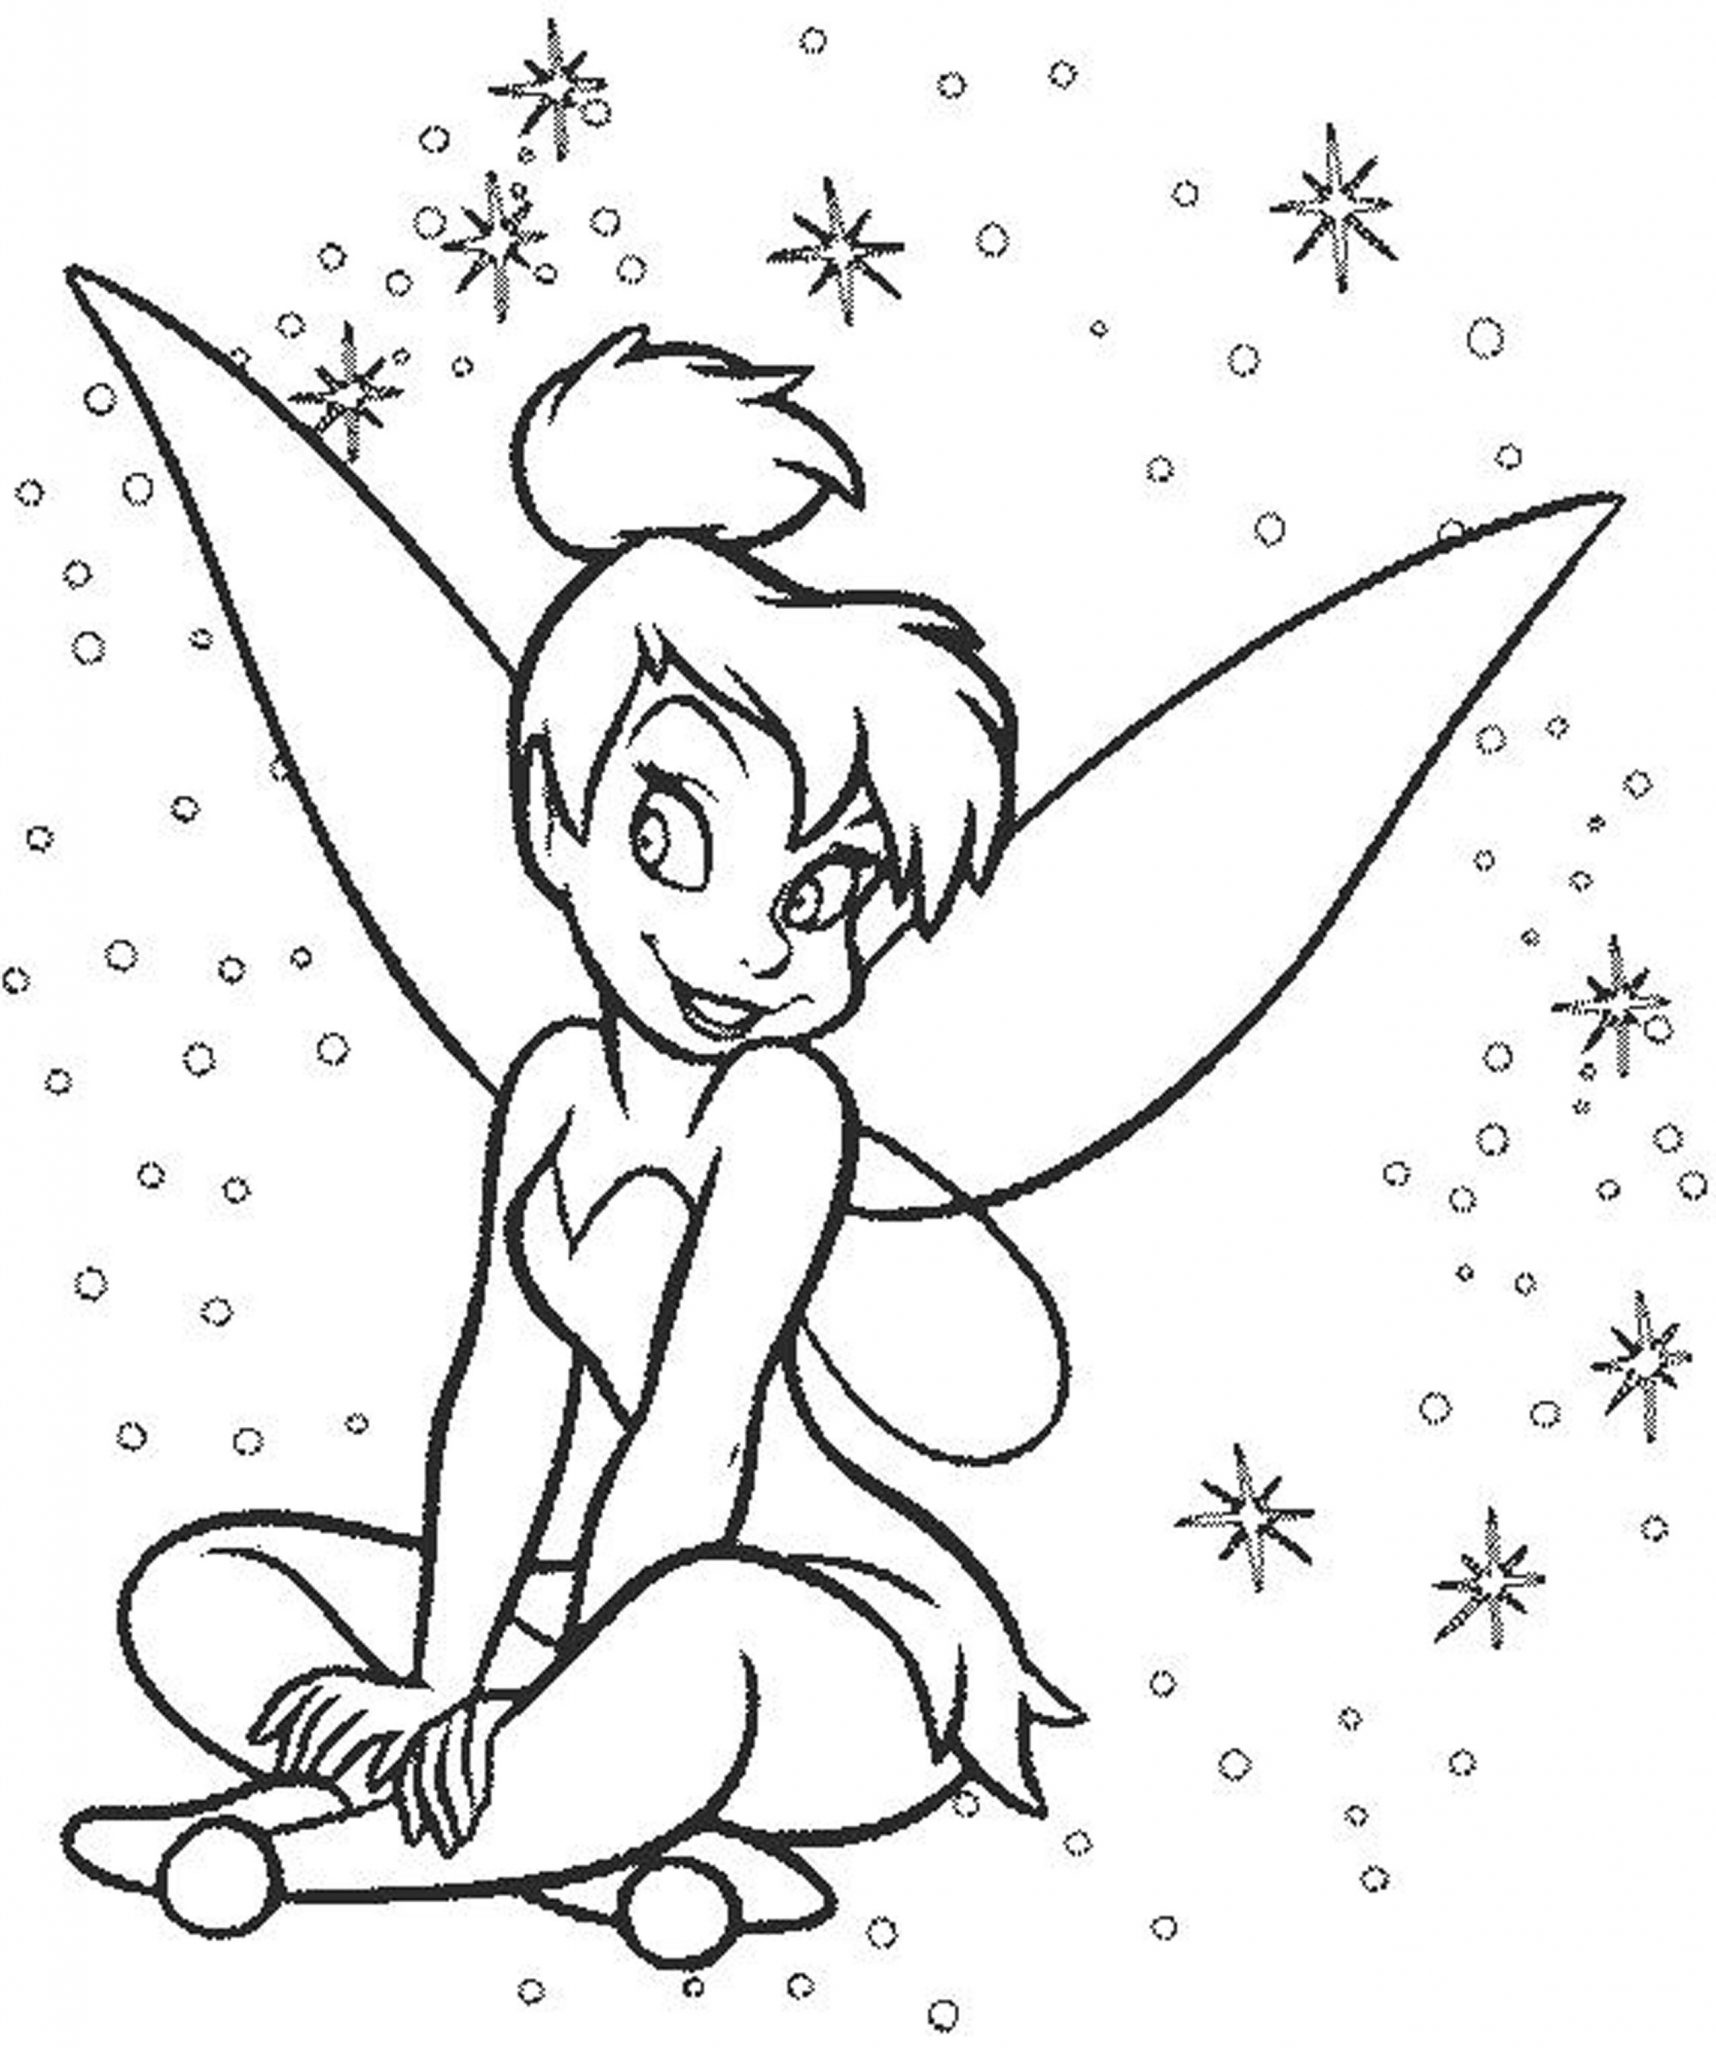 33-free-disney-coloring-pages-for-kids-baps